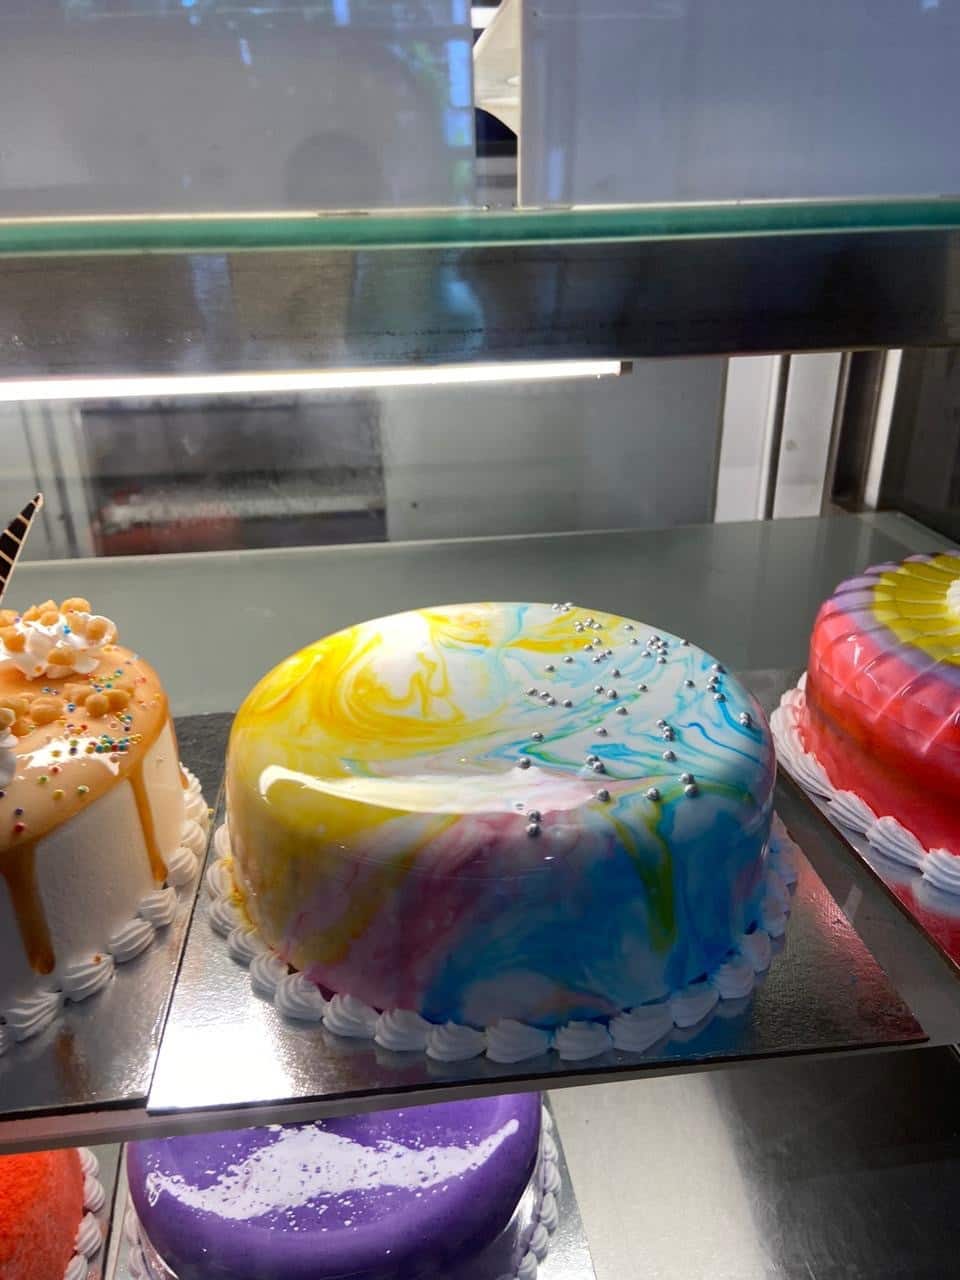 cakes in Imphal, Manipur (@qbee_desserts) • Instagram photos and videos